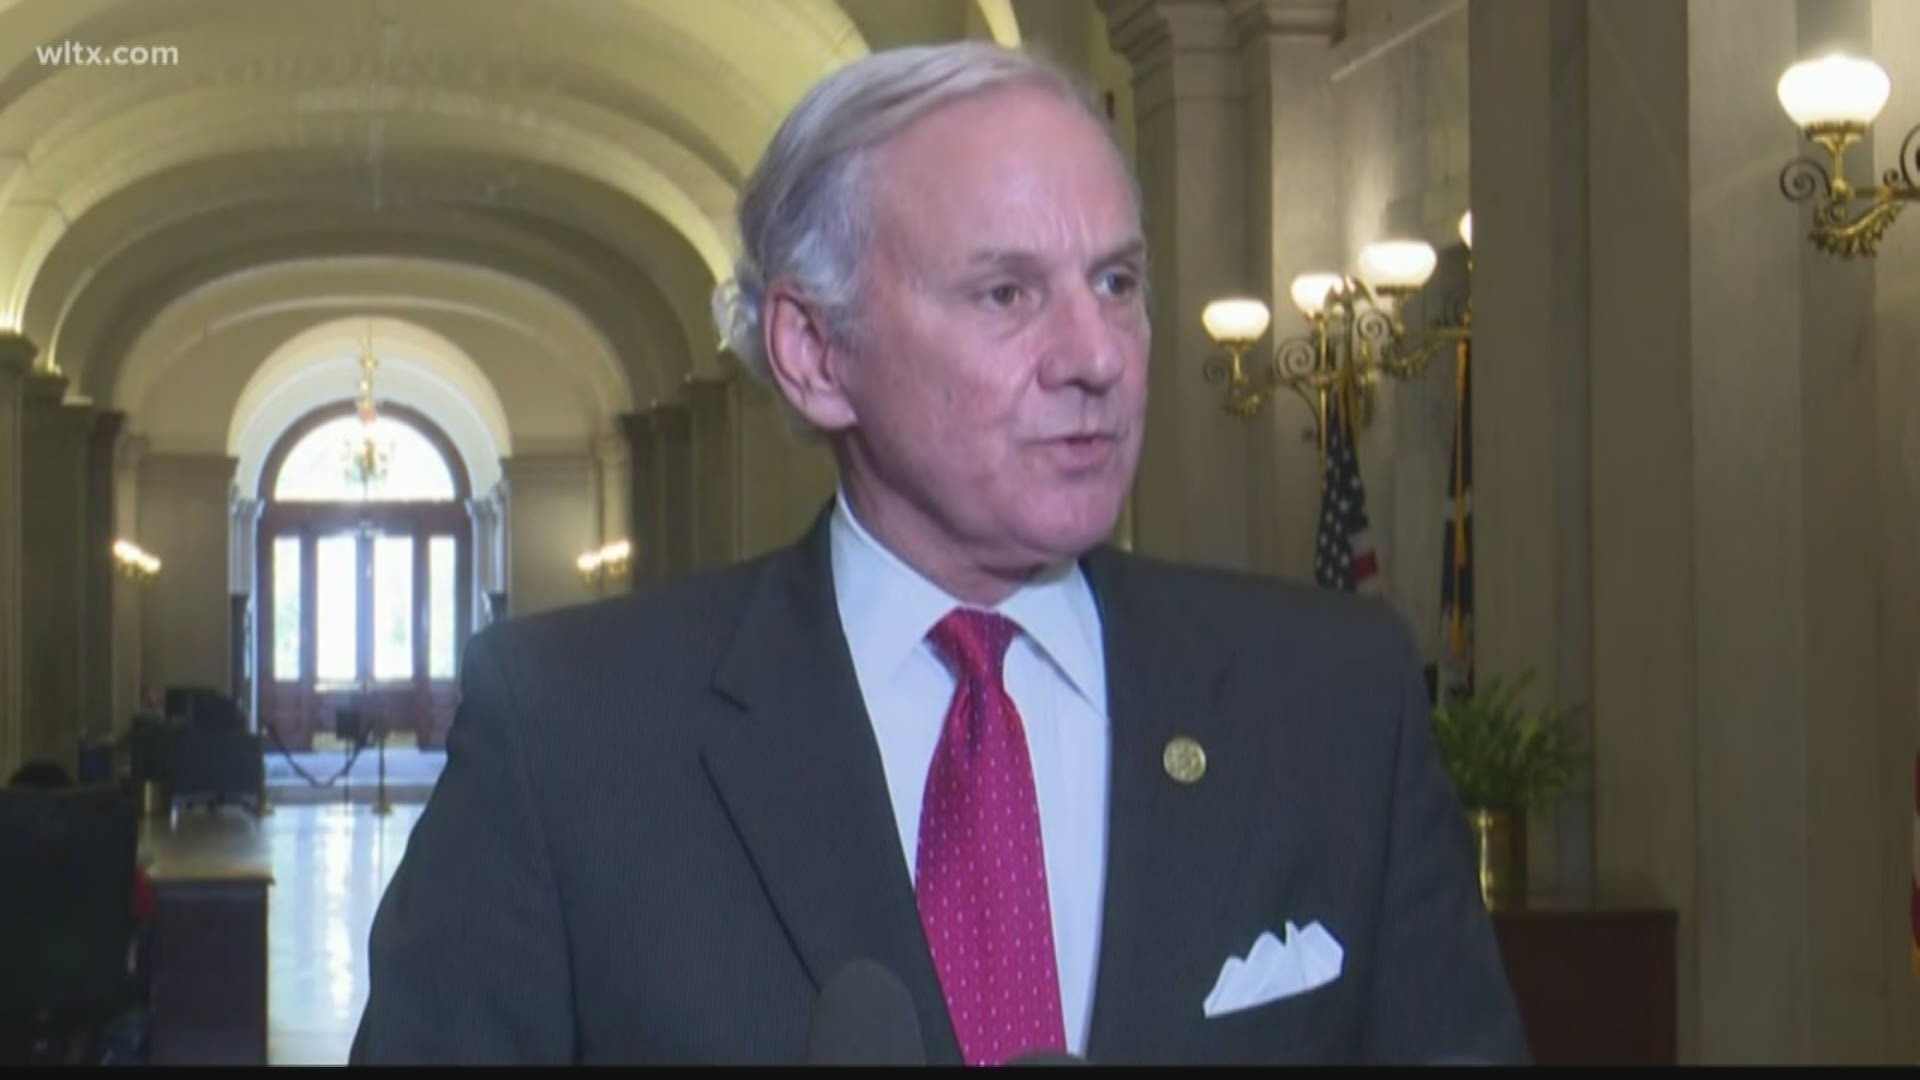 Gov. McMaster said all lines of communication are open with all branches of government as well as the state's industry.